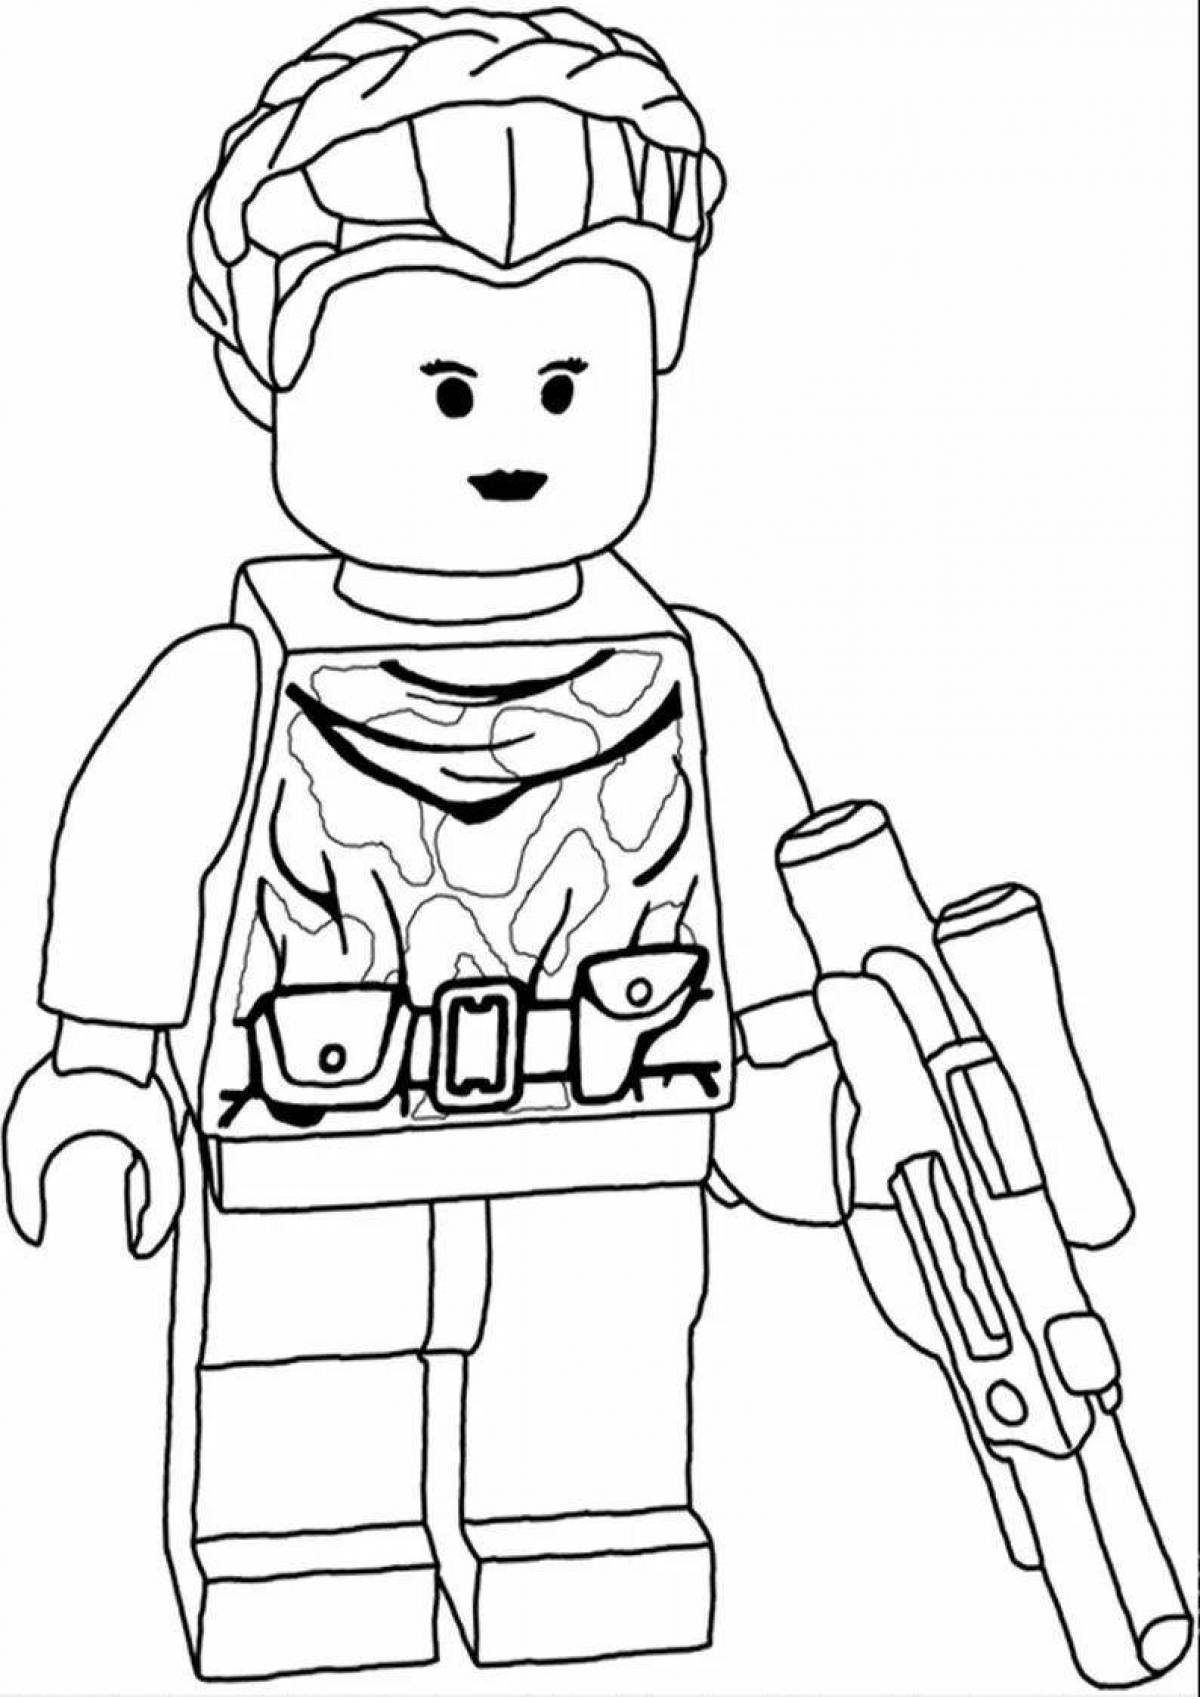 Lego imposing toy soldiers coloring book